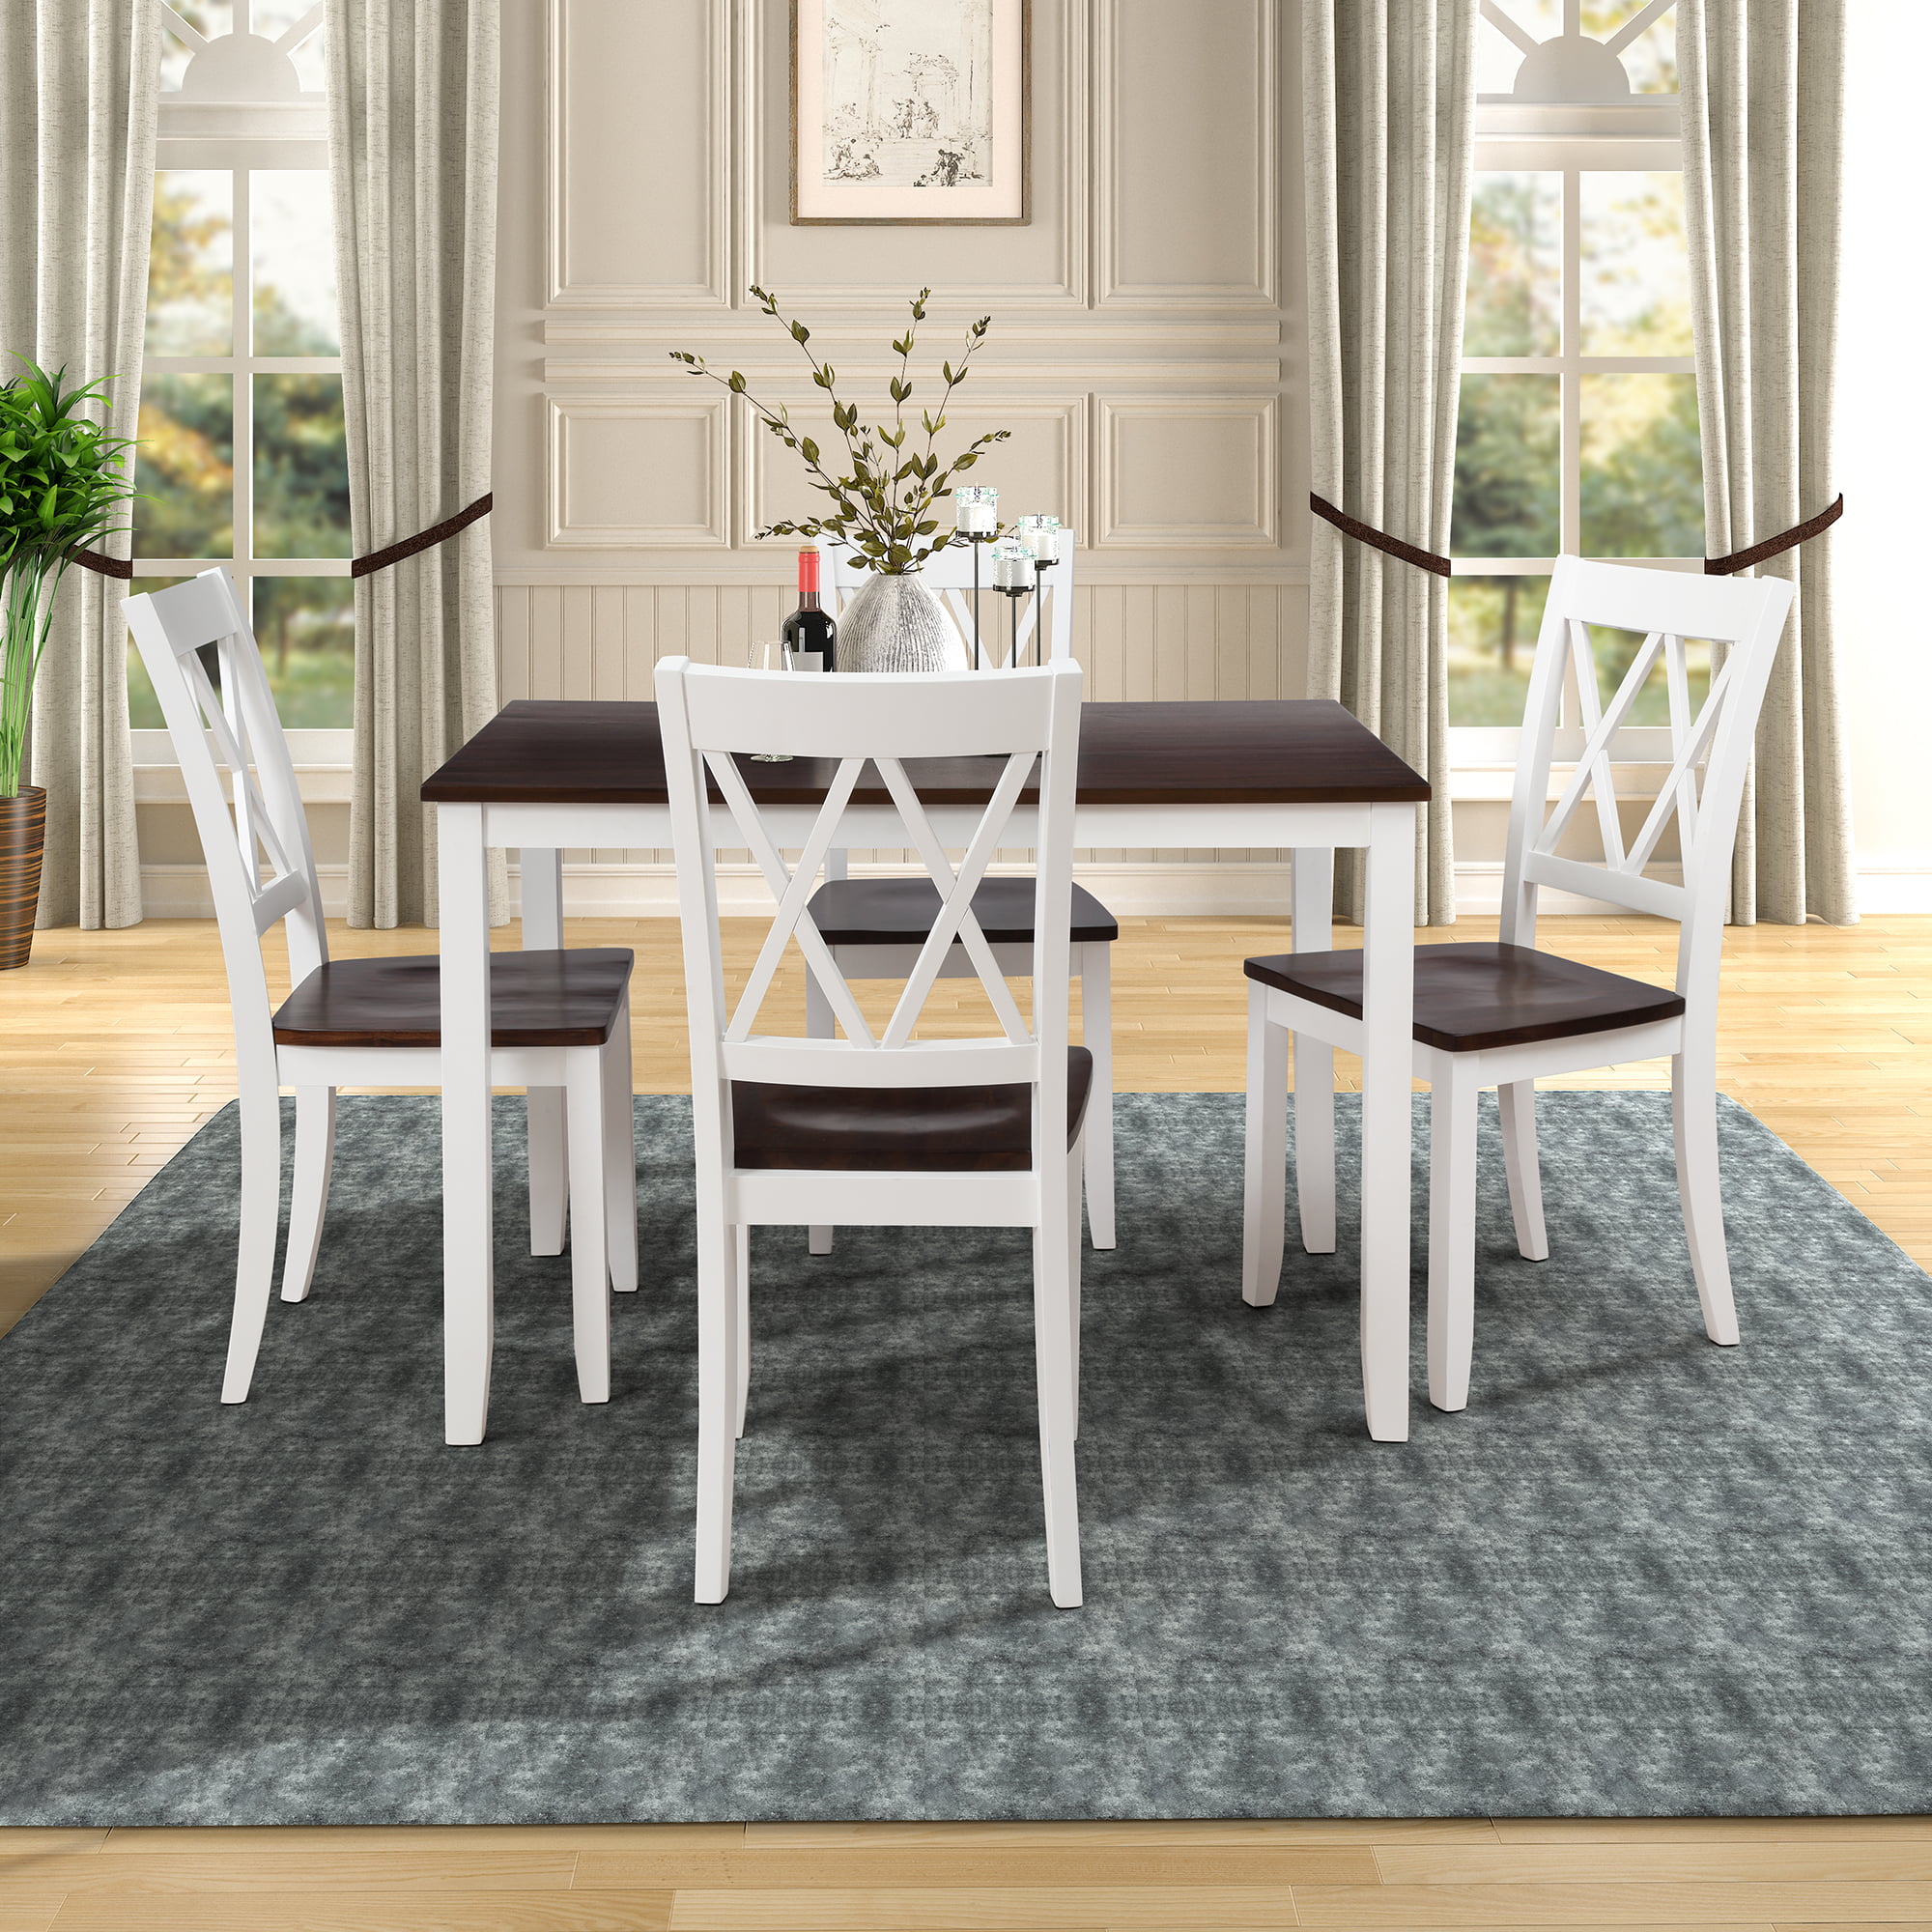 Modern Solid Wooden White Dining Table and 4 Chairs Set Home Kitchen Furniture 